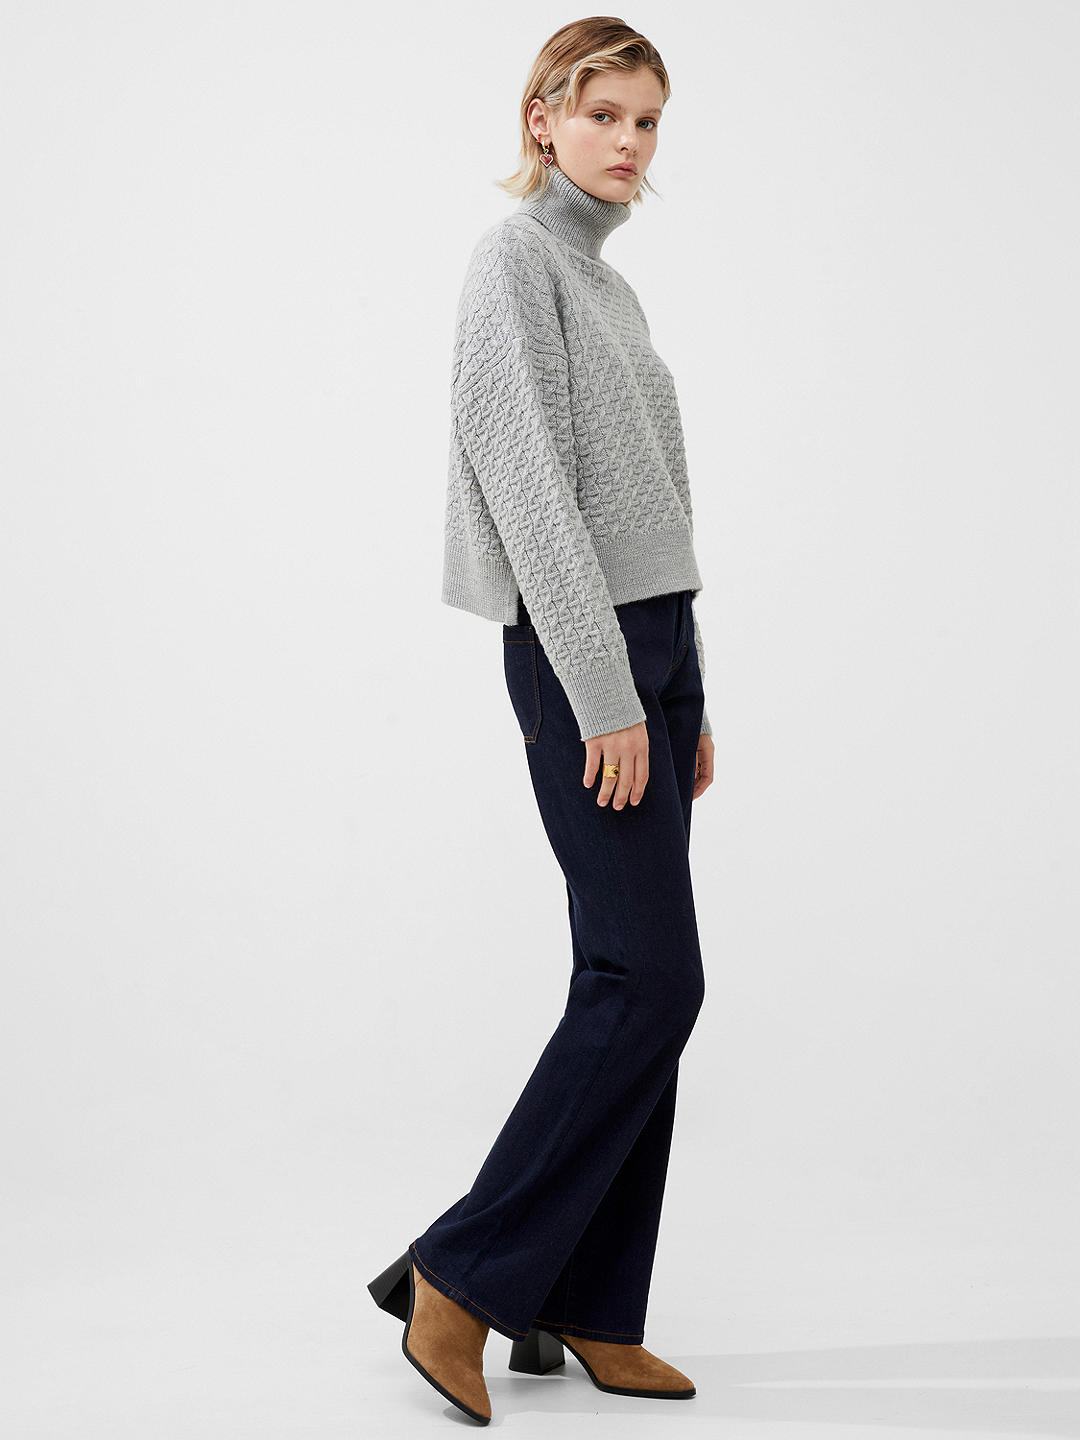 French Connection Jini Cable Knit Jumper, Light Grey Melange